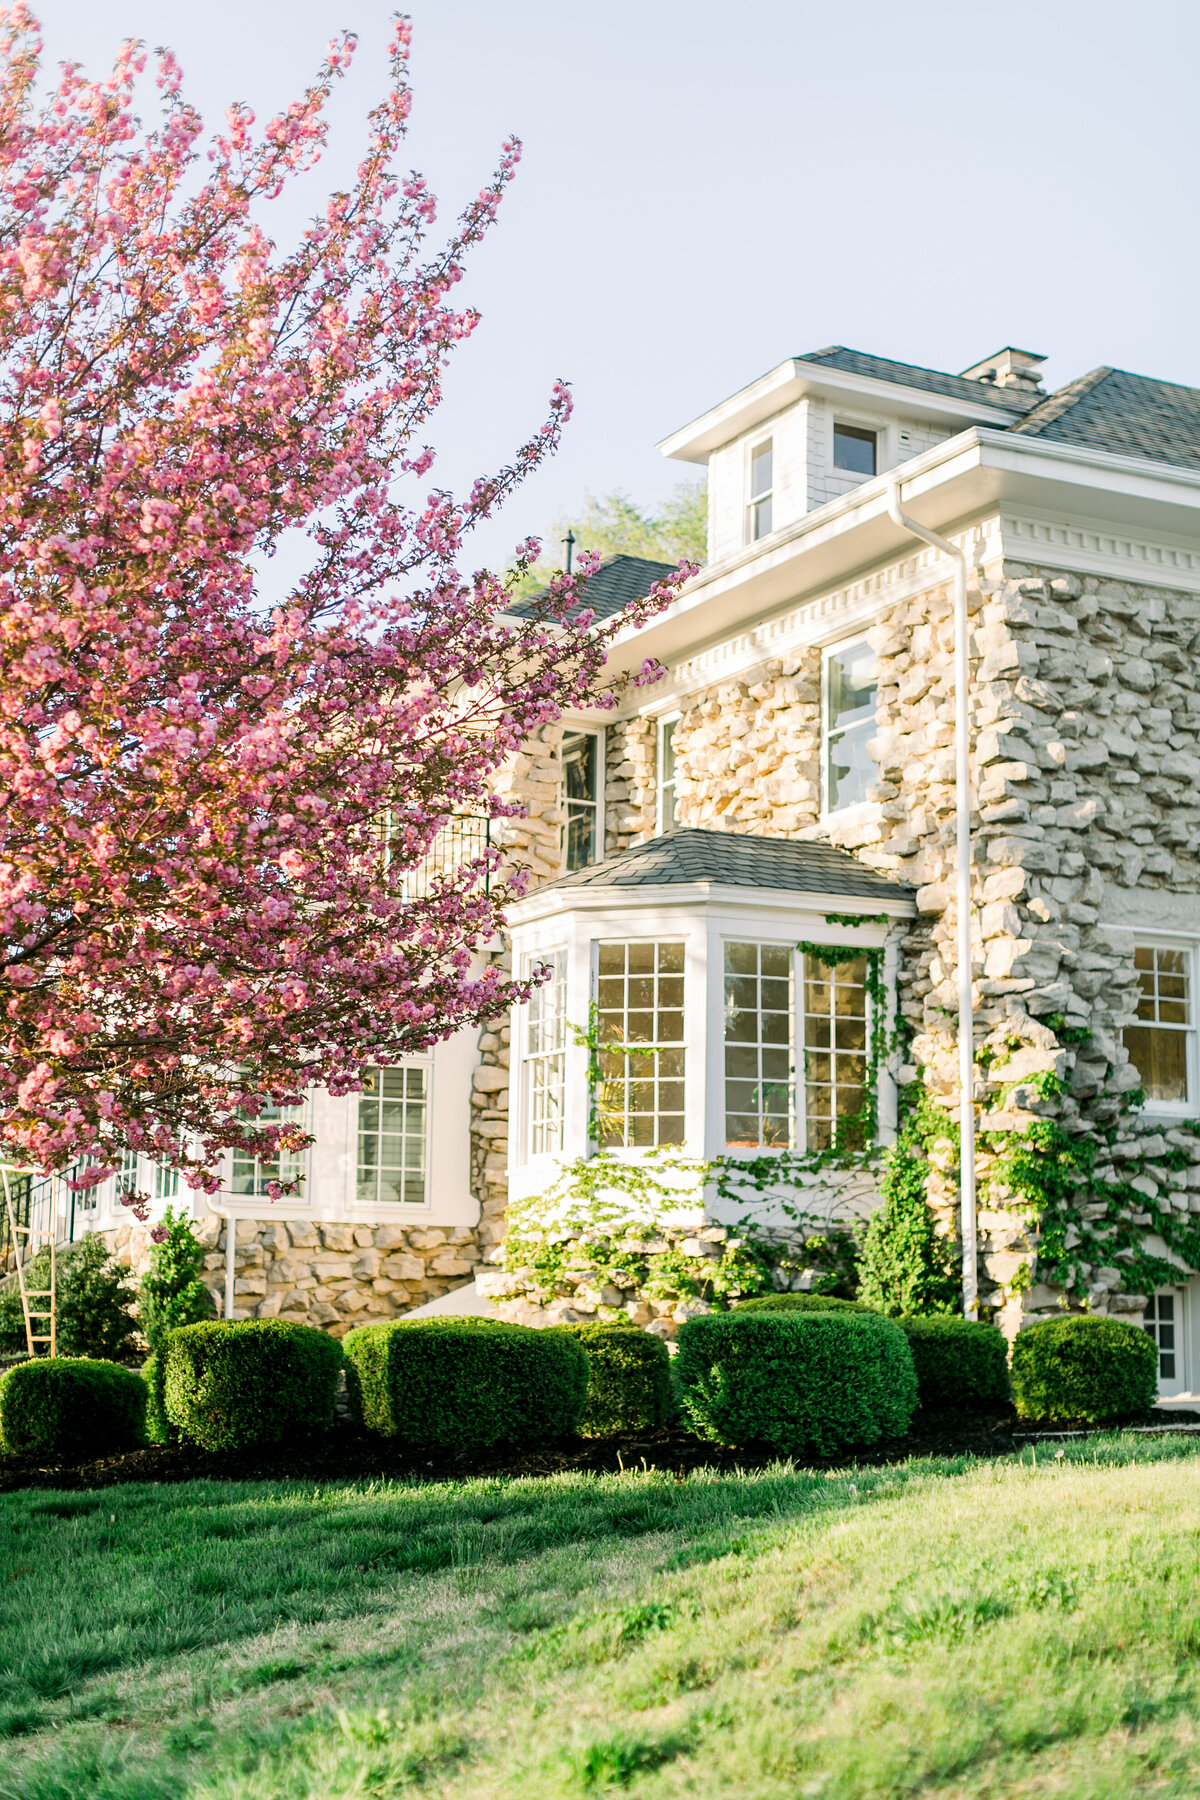 haseltine-estate-in-springfield-mo-in-springtime-blooming-pink-tree-with-european-style-wedding-venue-by-springfield-mo-wedding-photographer-kathryn-faye-photography